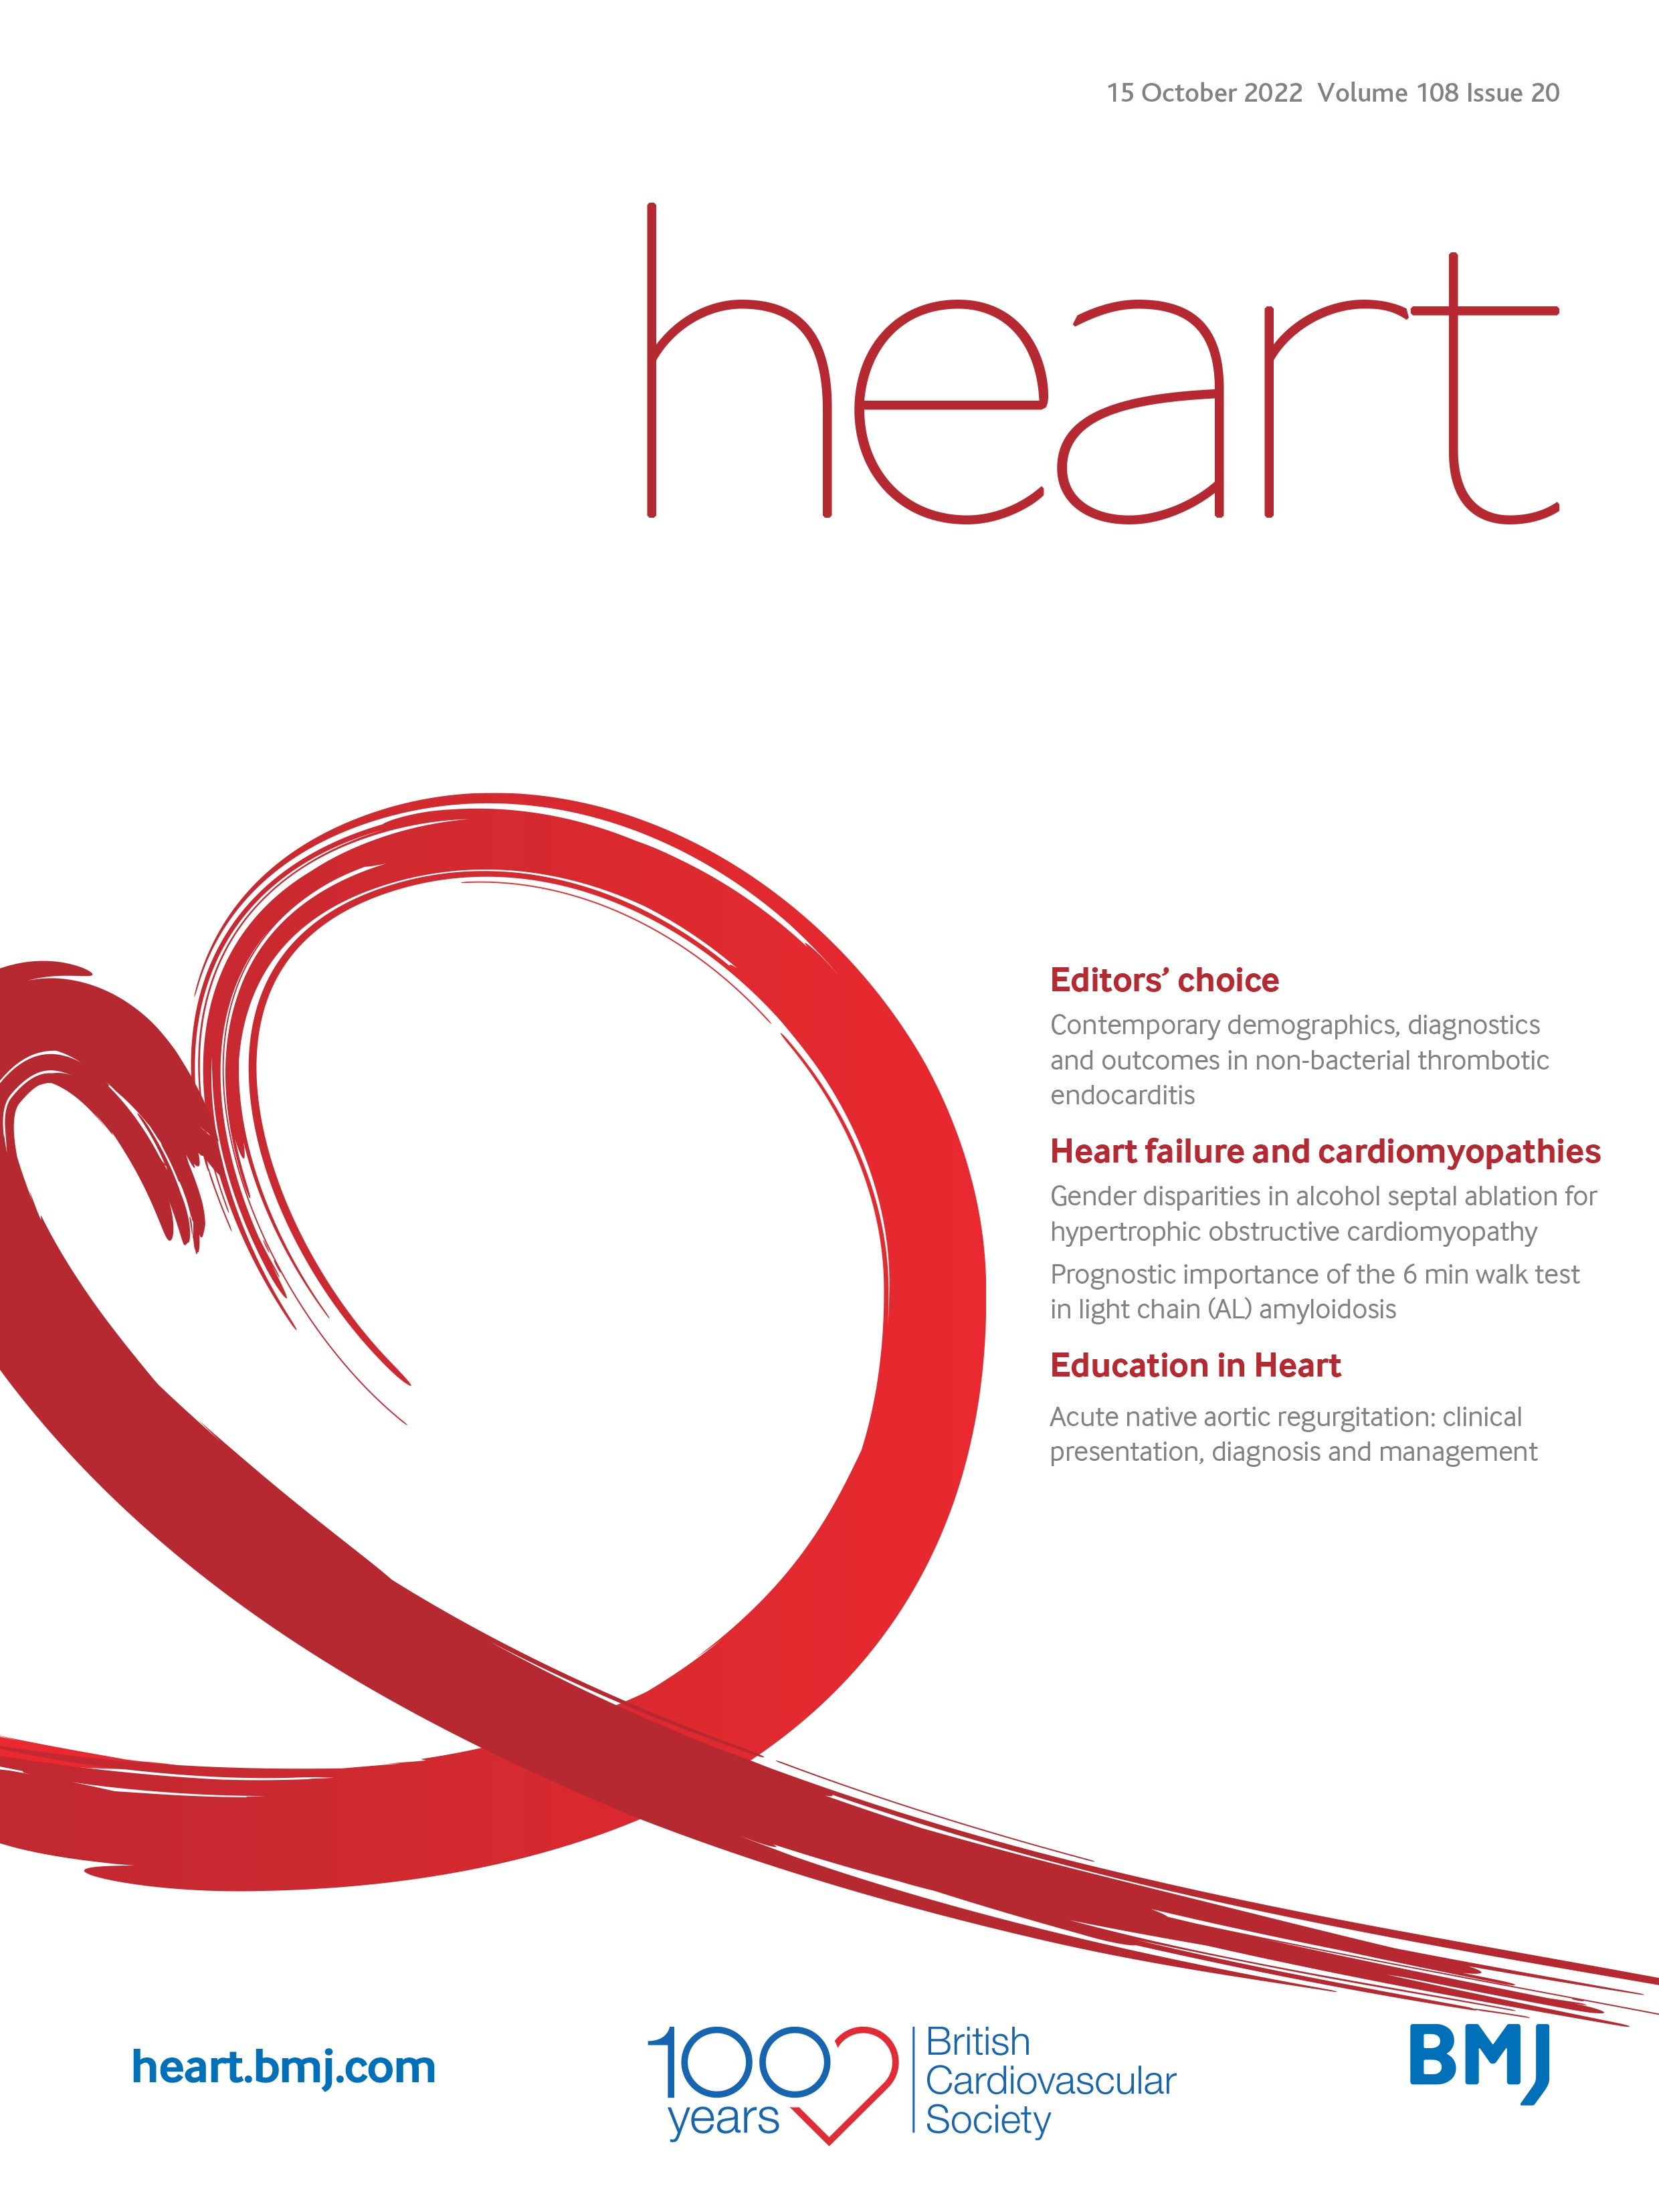 Roadmap to a career in cardiogenetics